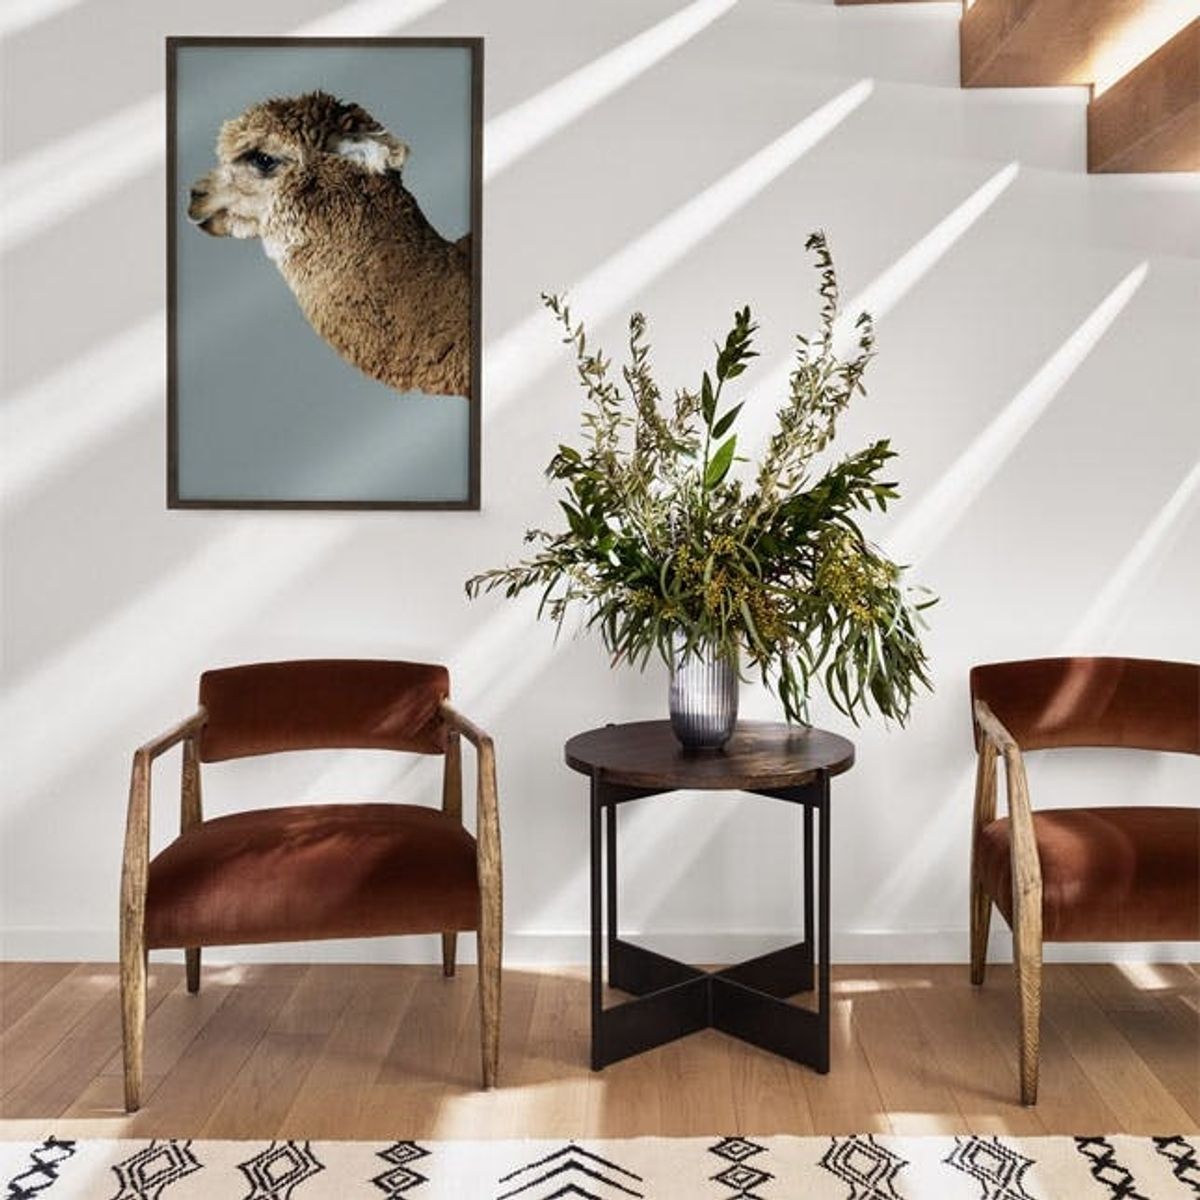 15 Furniture Decor Trends We’re Already Loving in 2019